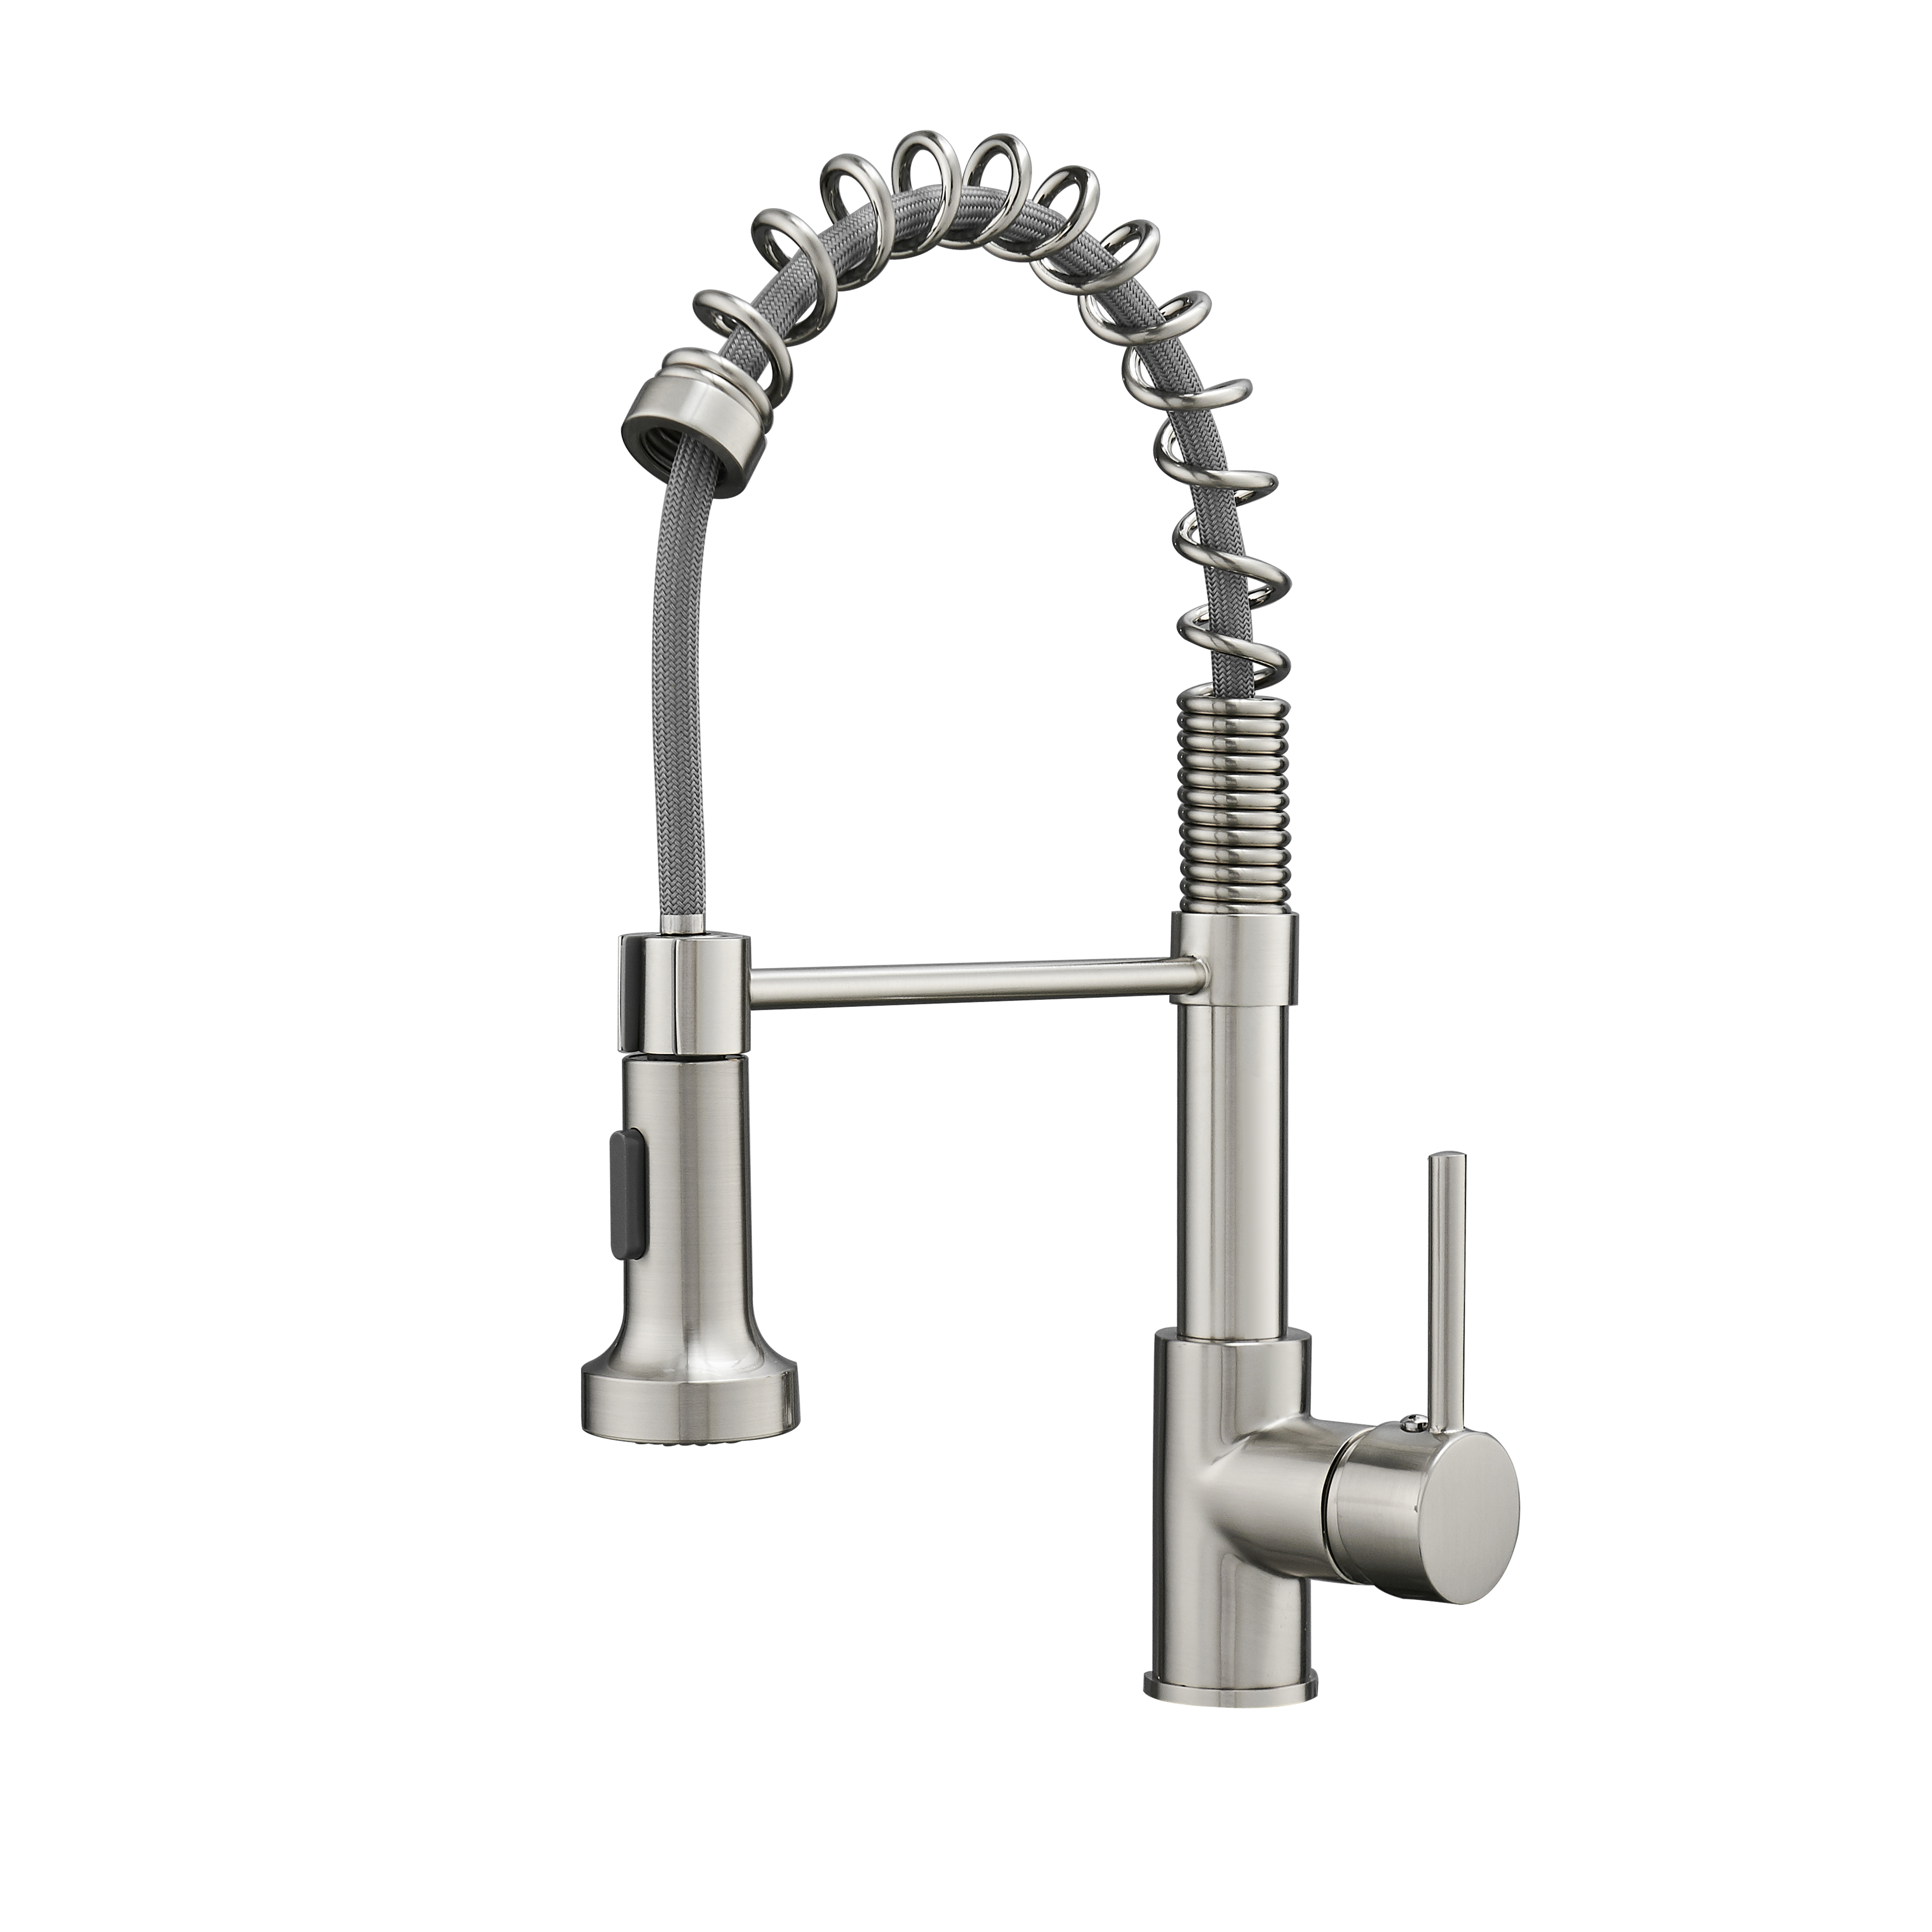 Kitchen Faucet Pull Out Sprayer,Stainless Steel Single Handle Kitchen Sink Faucet ,Brushed Nickel